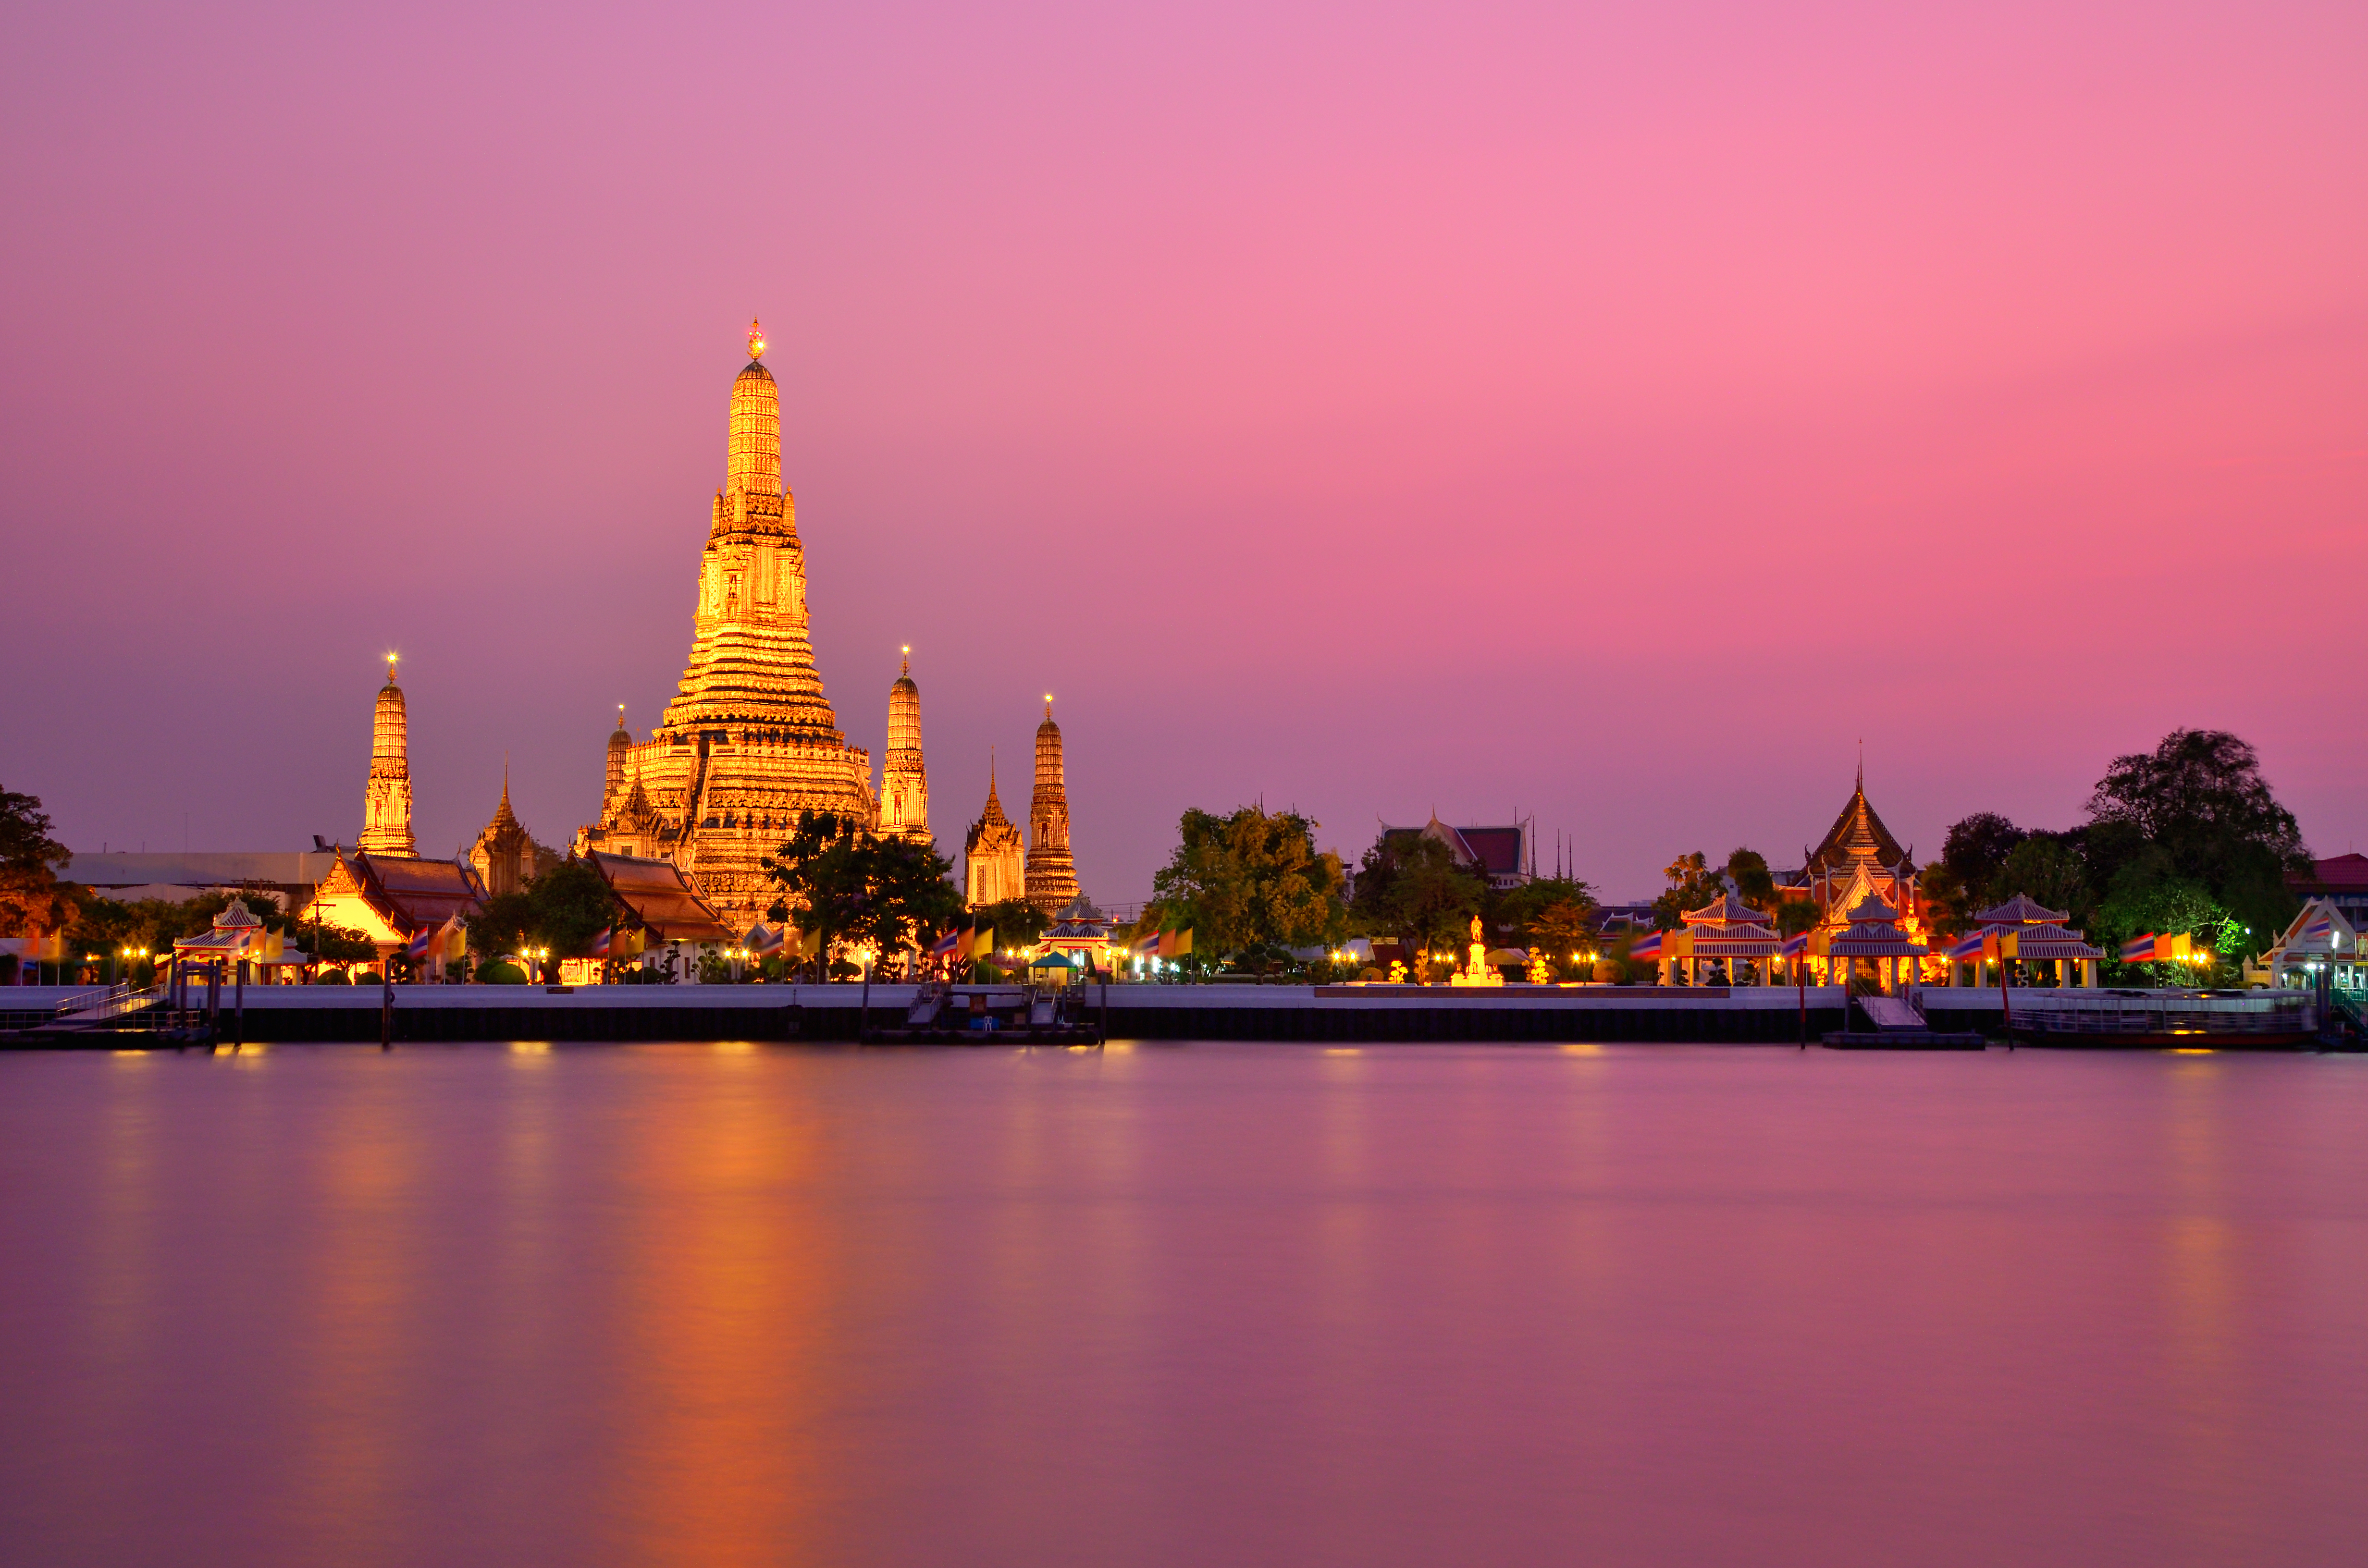 Bathed in golden light, Wat Arun sits against a pink sky at sunset in Bangkok, Thailand.